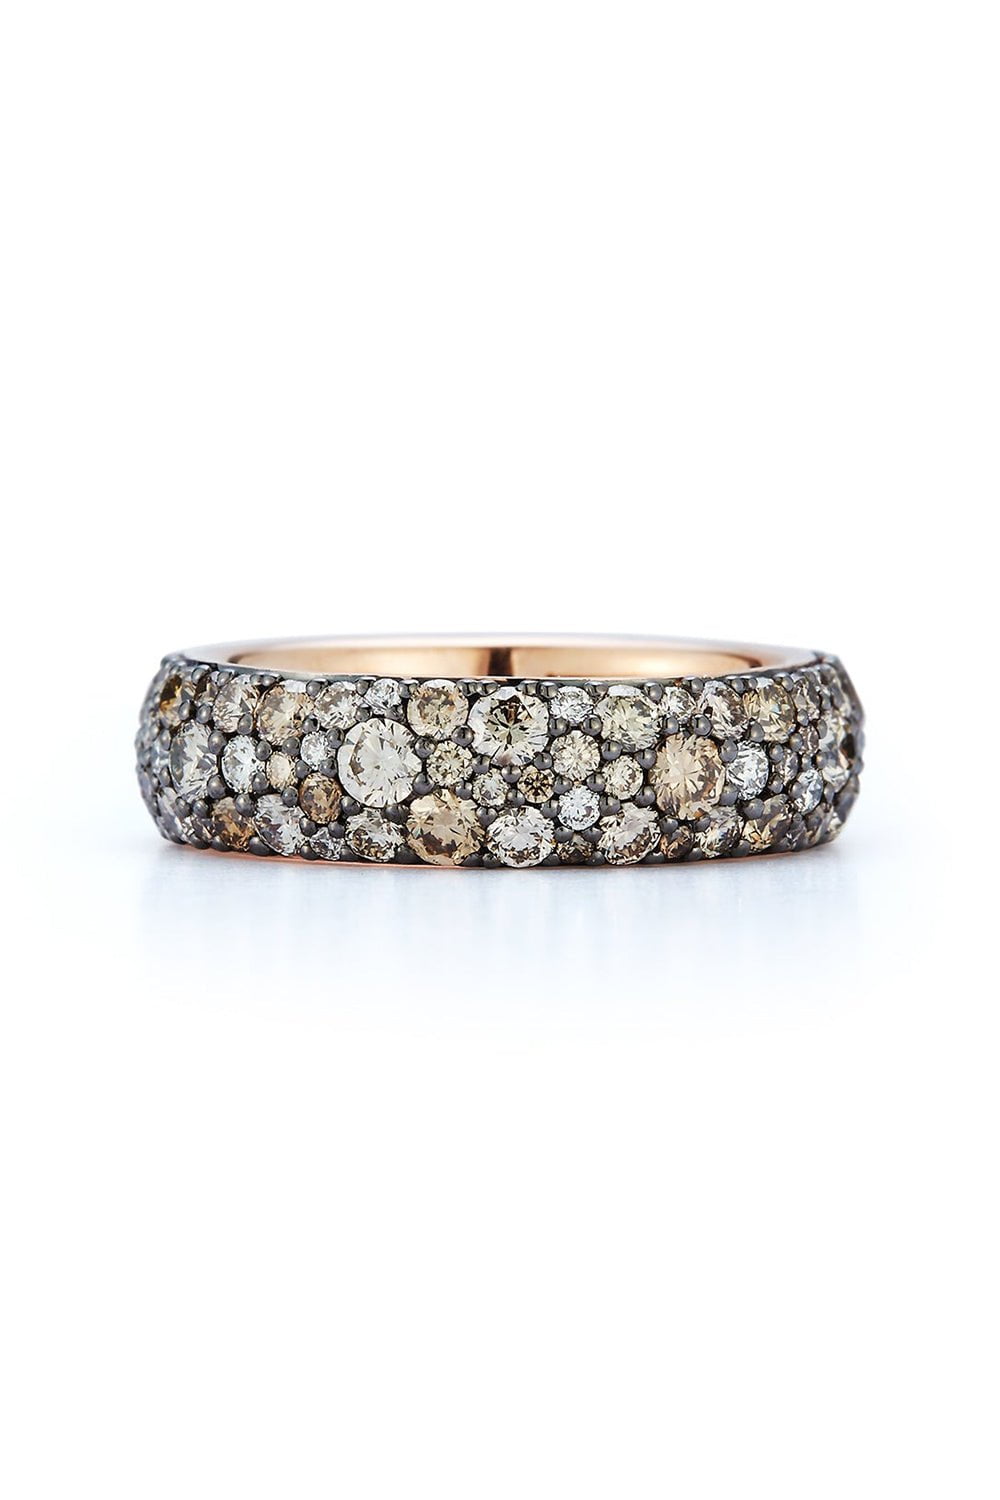 Buy Brown Diamond Eternity Band in 18k White Gold, Champagne Diamond Ring  Online in India - Etsy